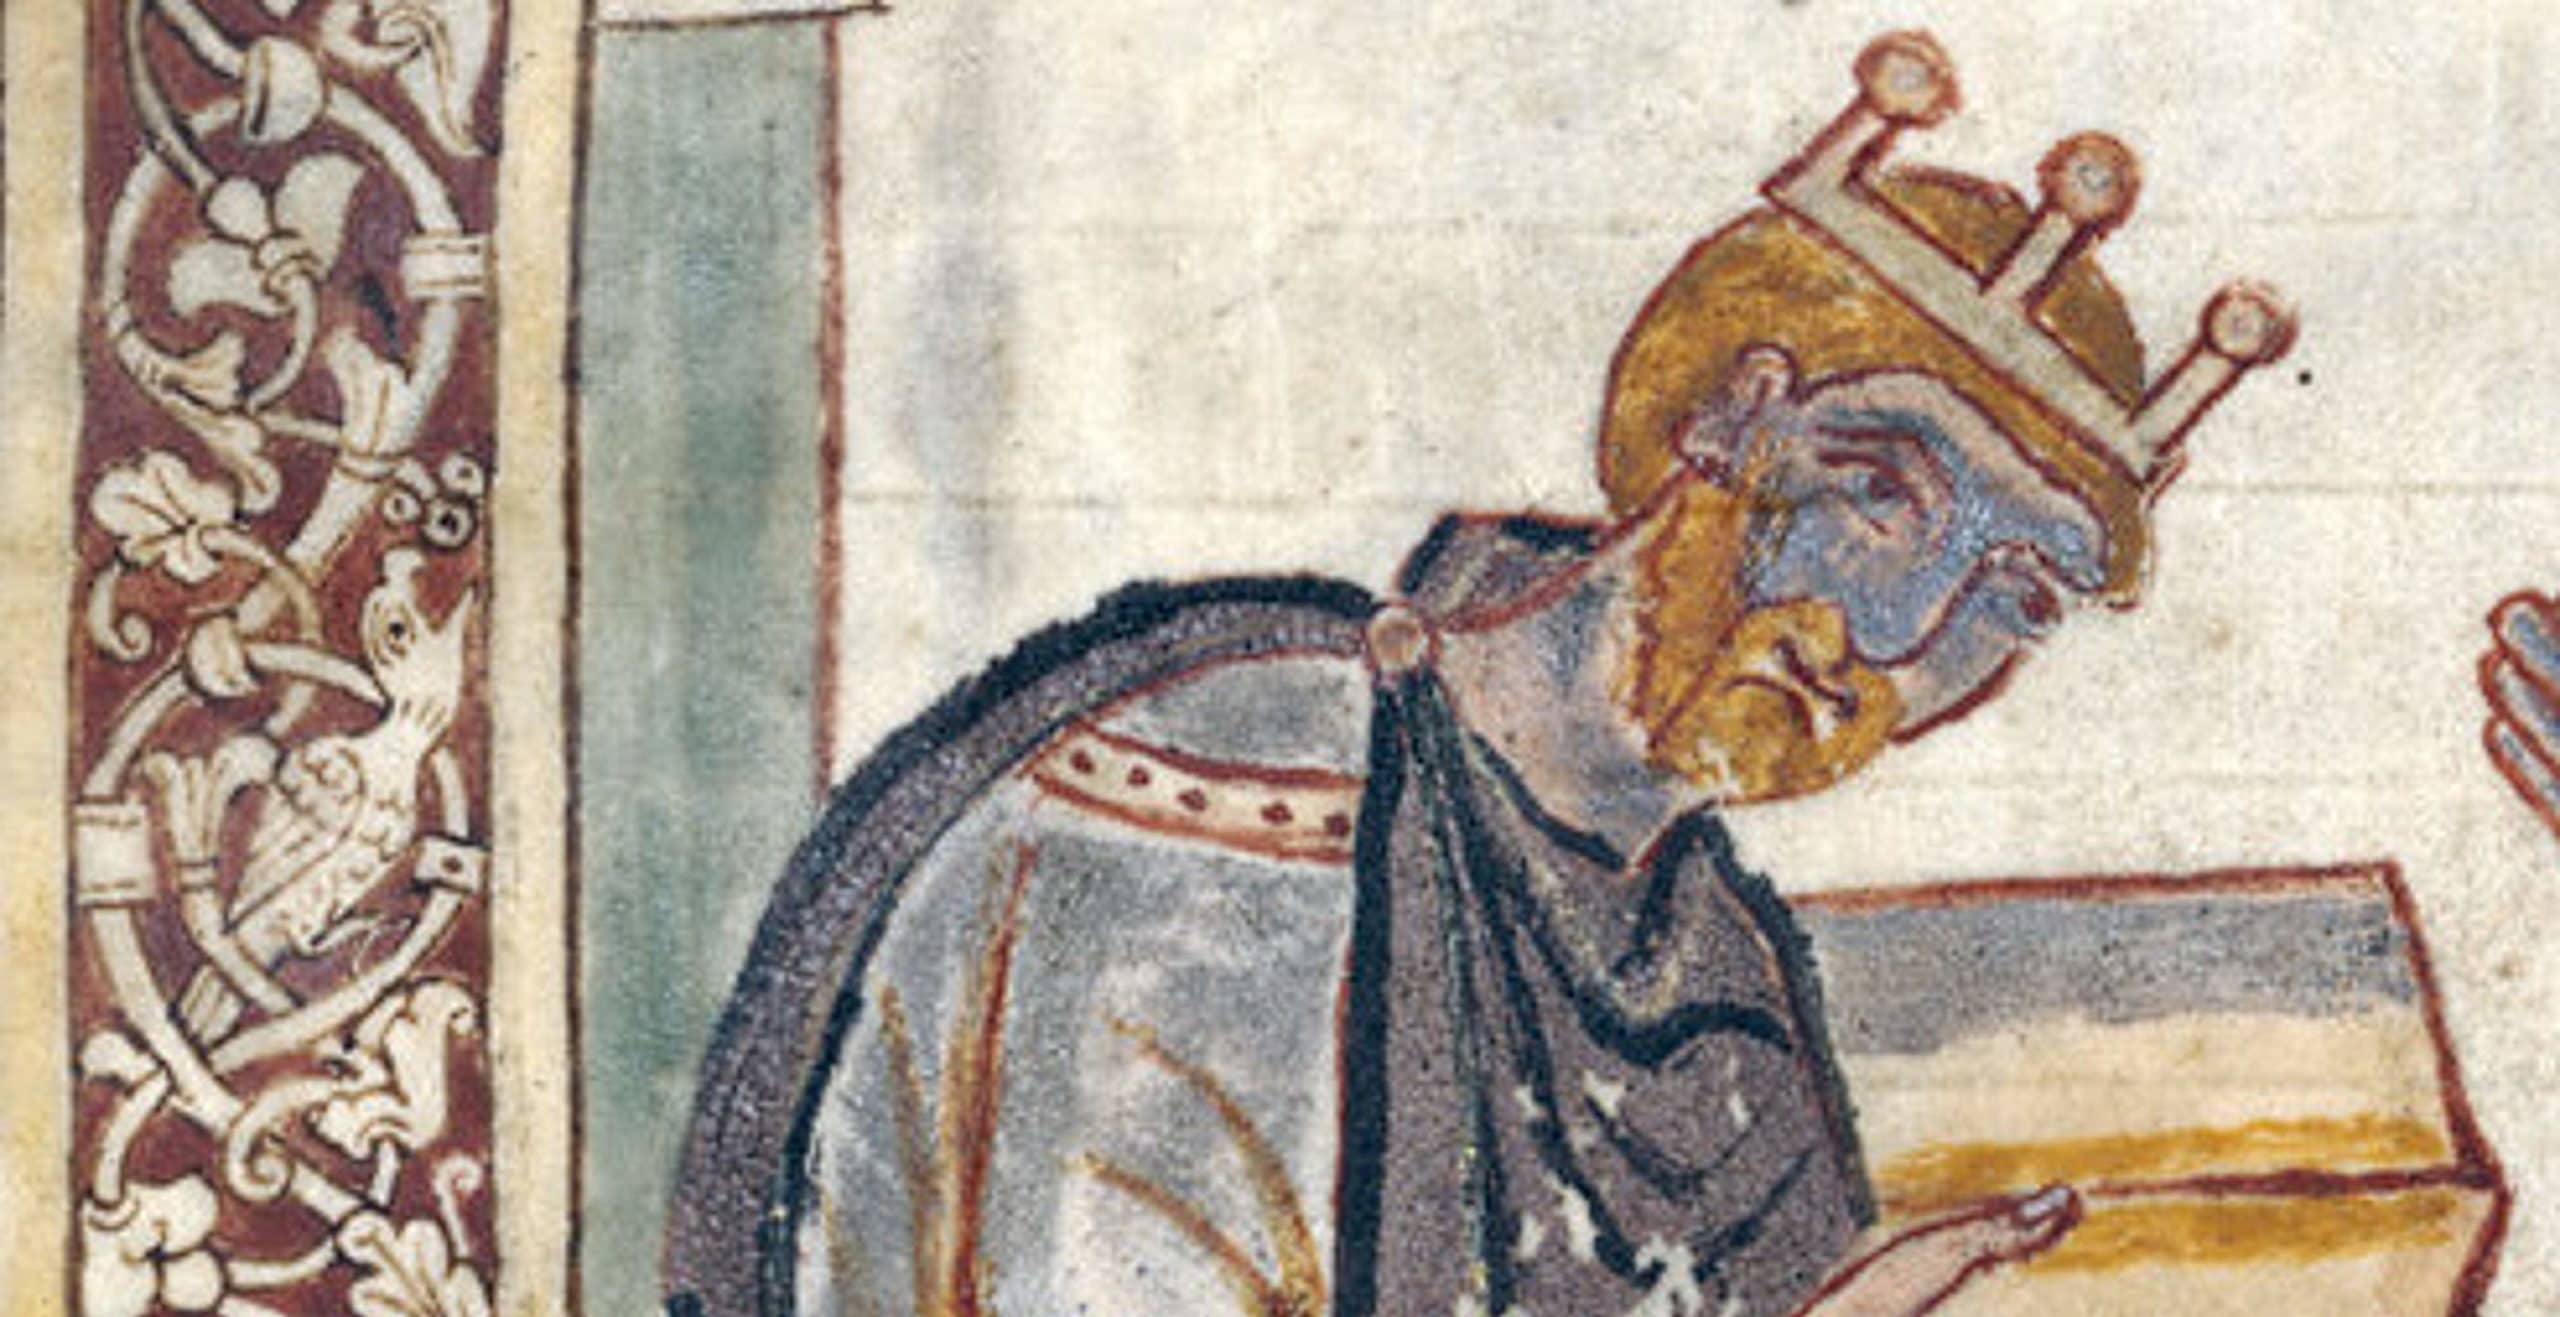 Who Was the First King of England?